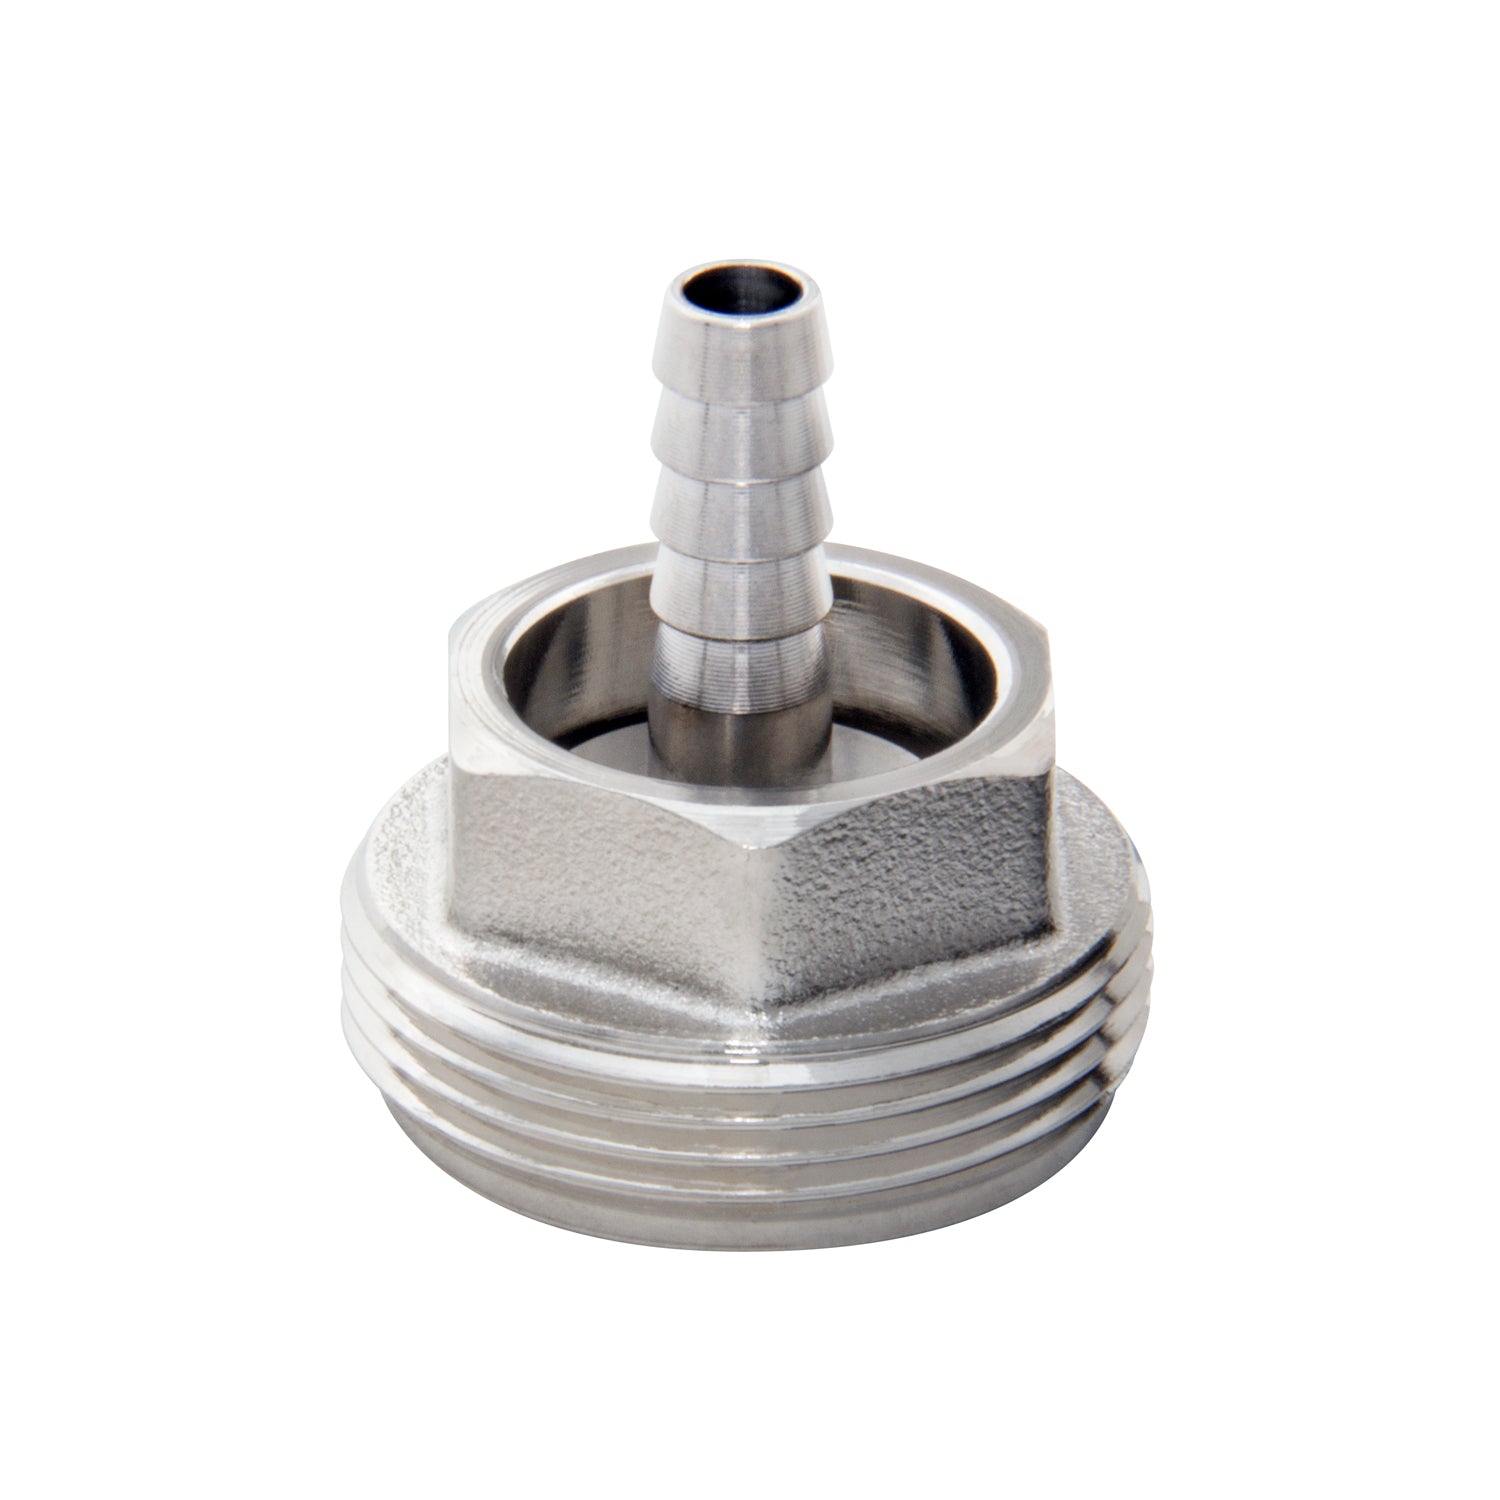 Threaded Faucet Adapter with Hose Nipple